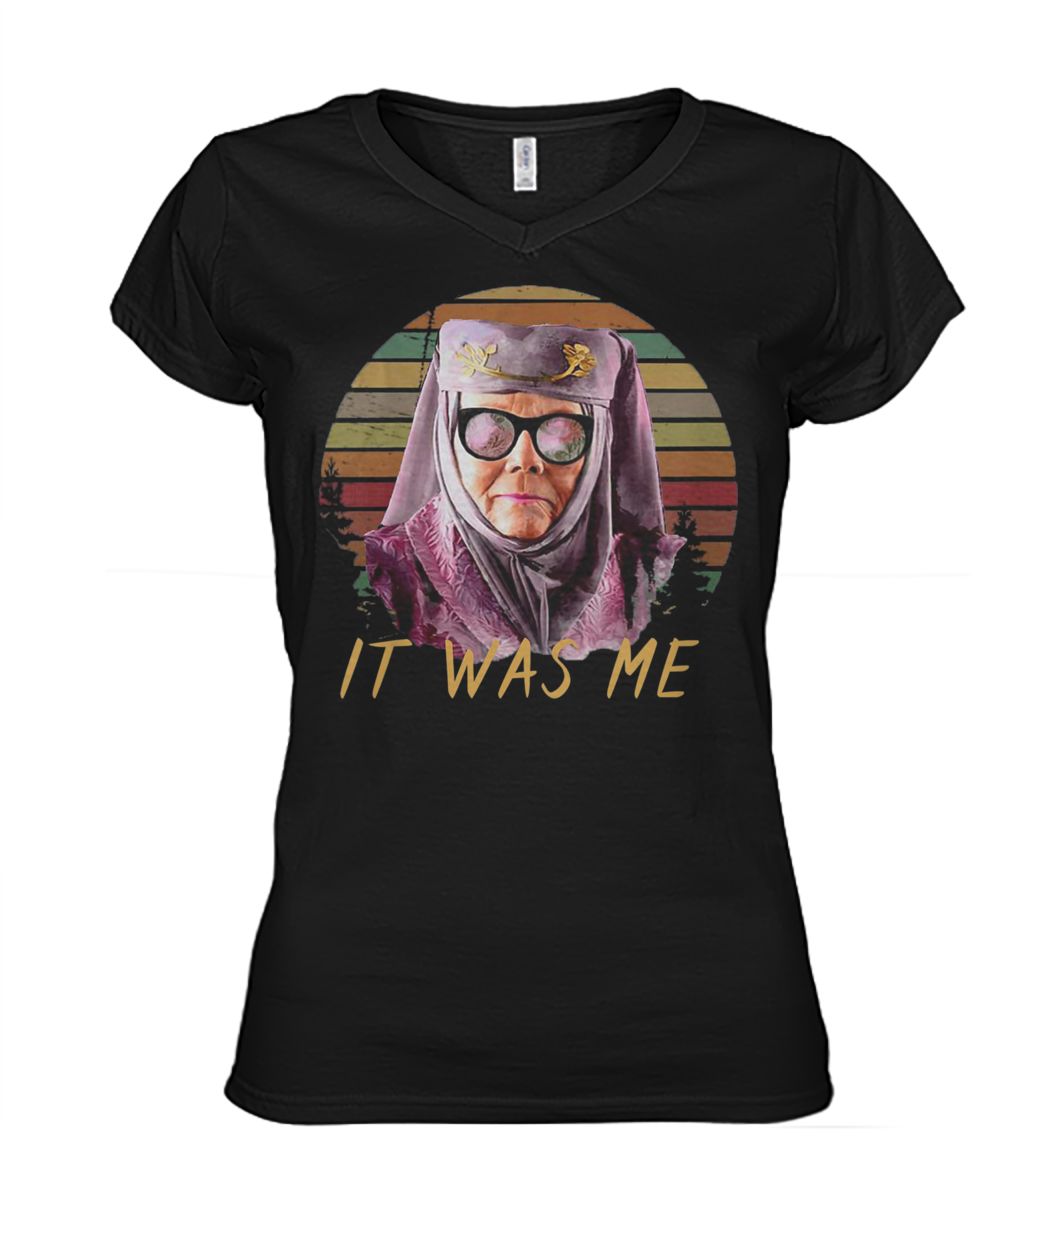 Olenna tyrell tell cersei it was me game of thrones women's v-neck